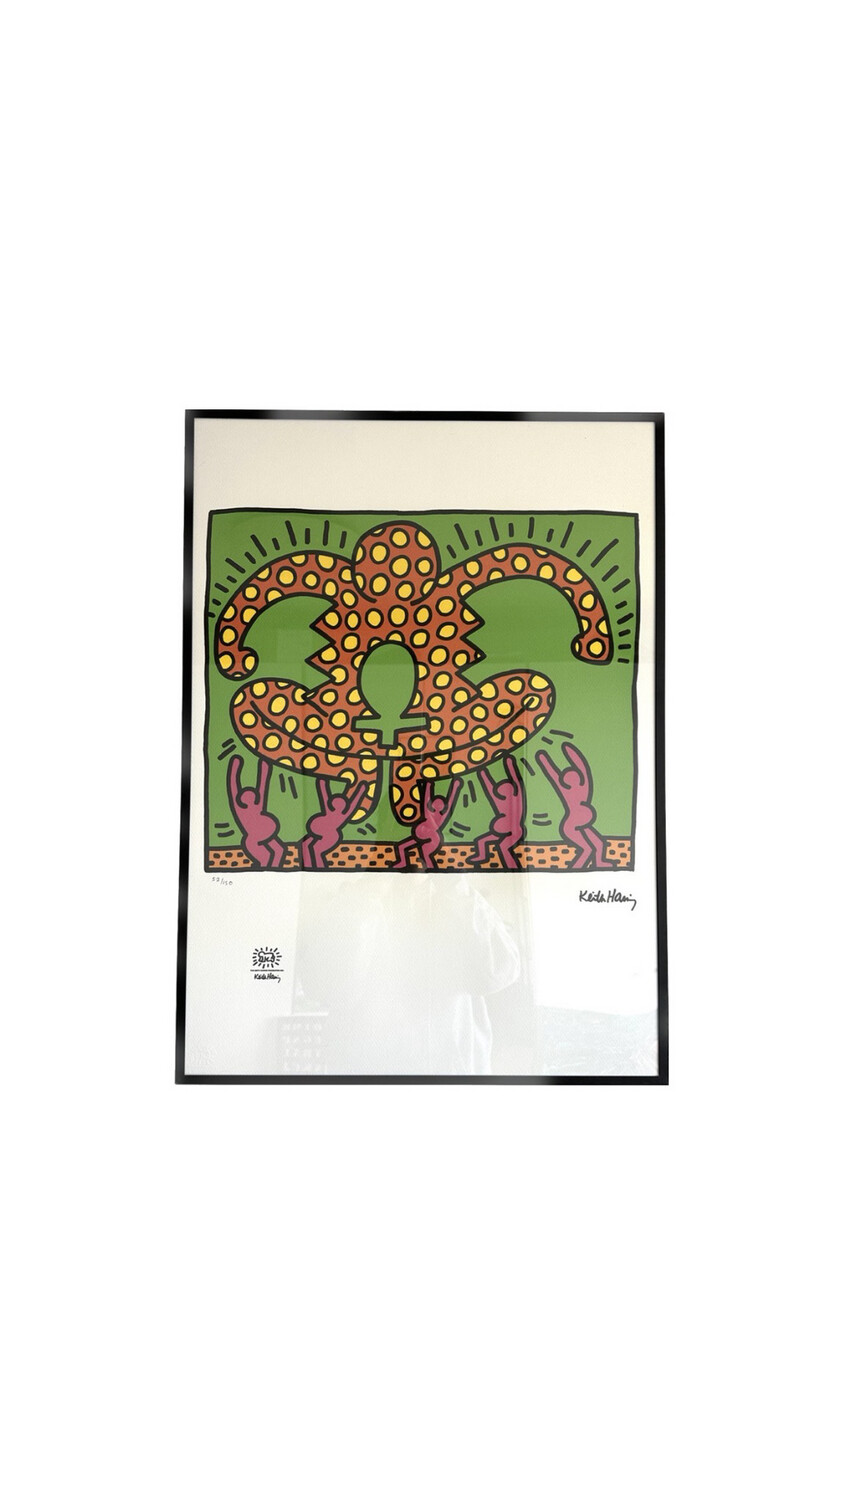 Keith Haring limited edition 57/150